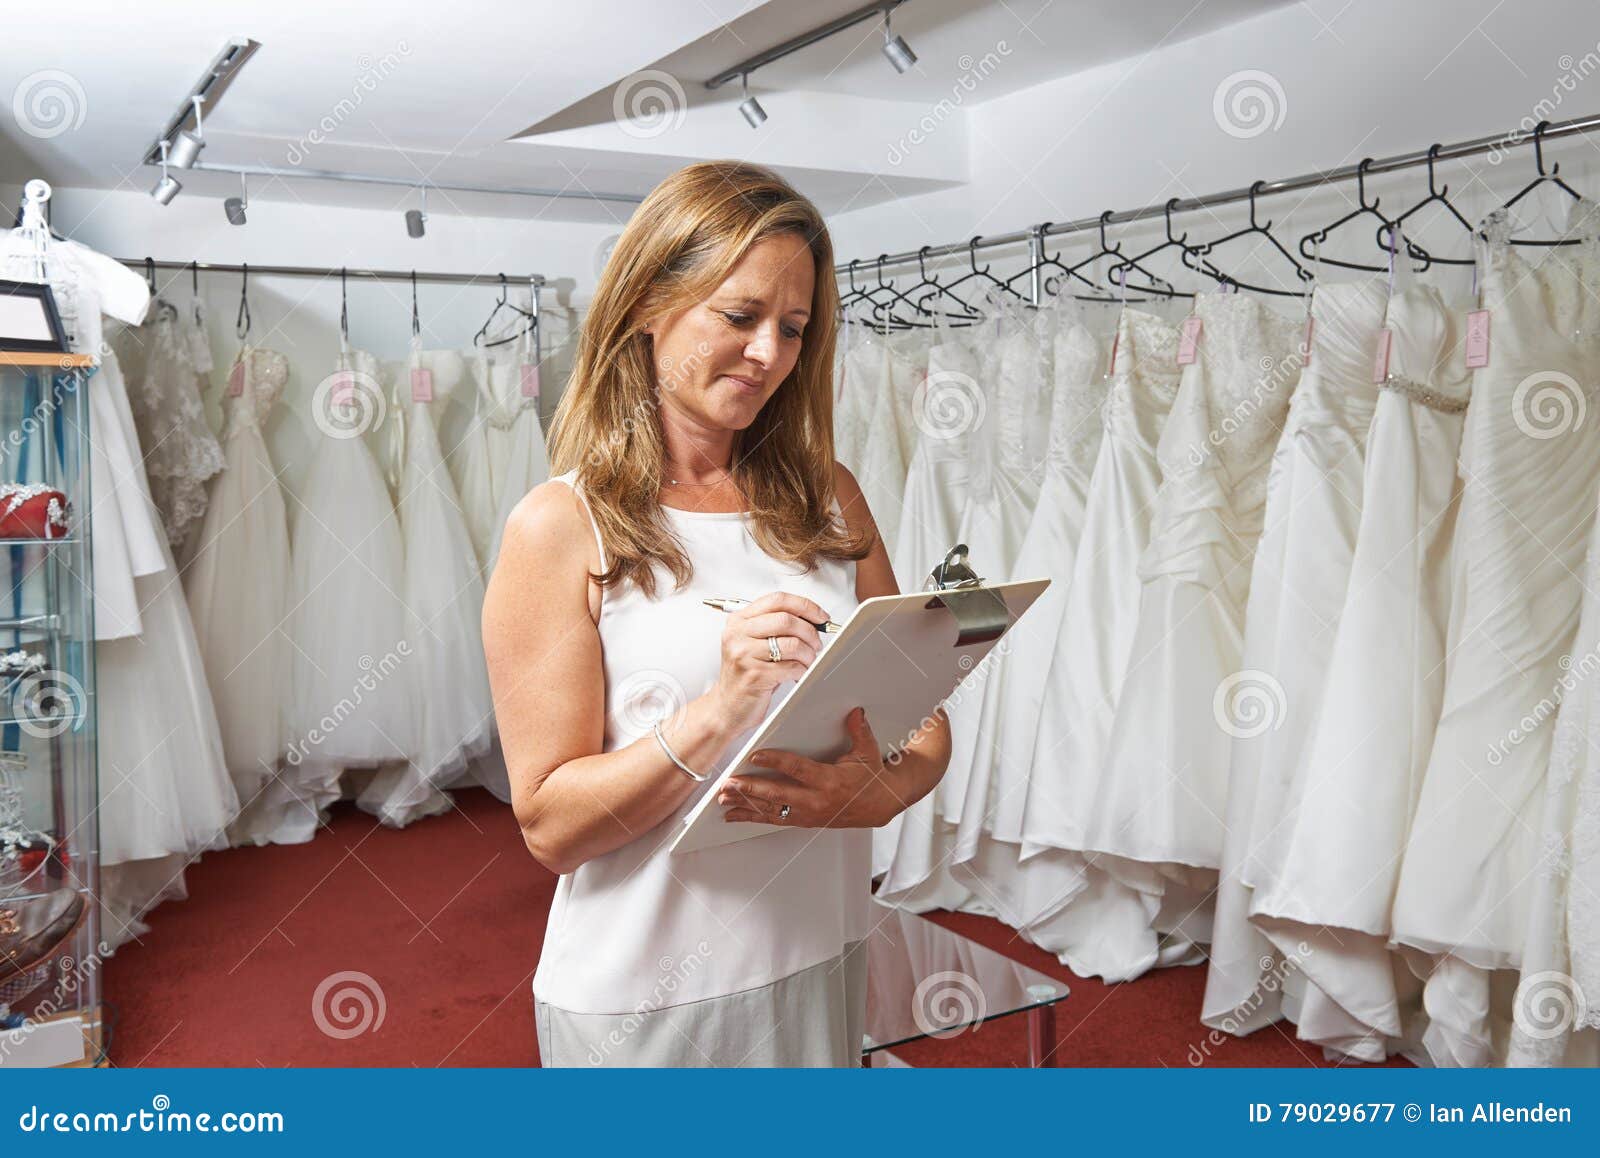 Female Bridal  Store  Owner  With Wedding  Dresses  Stock Photo 